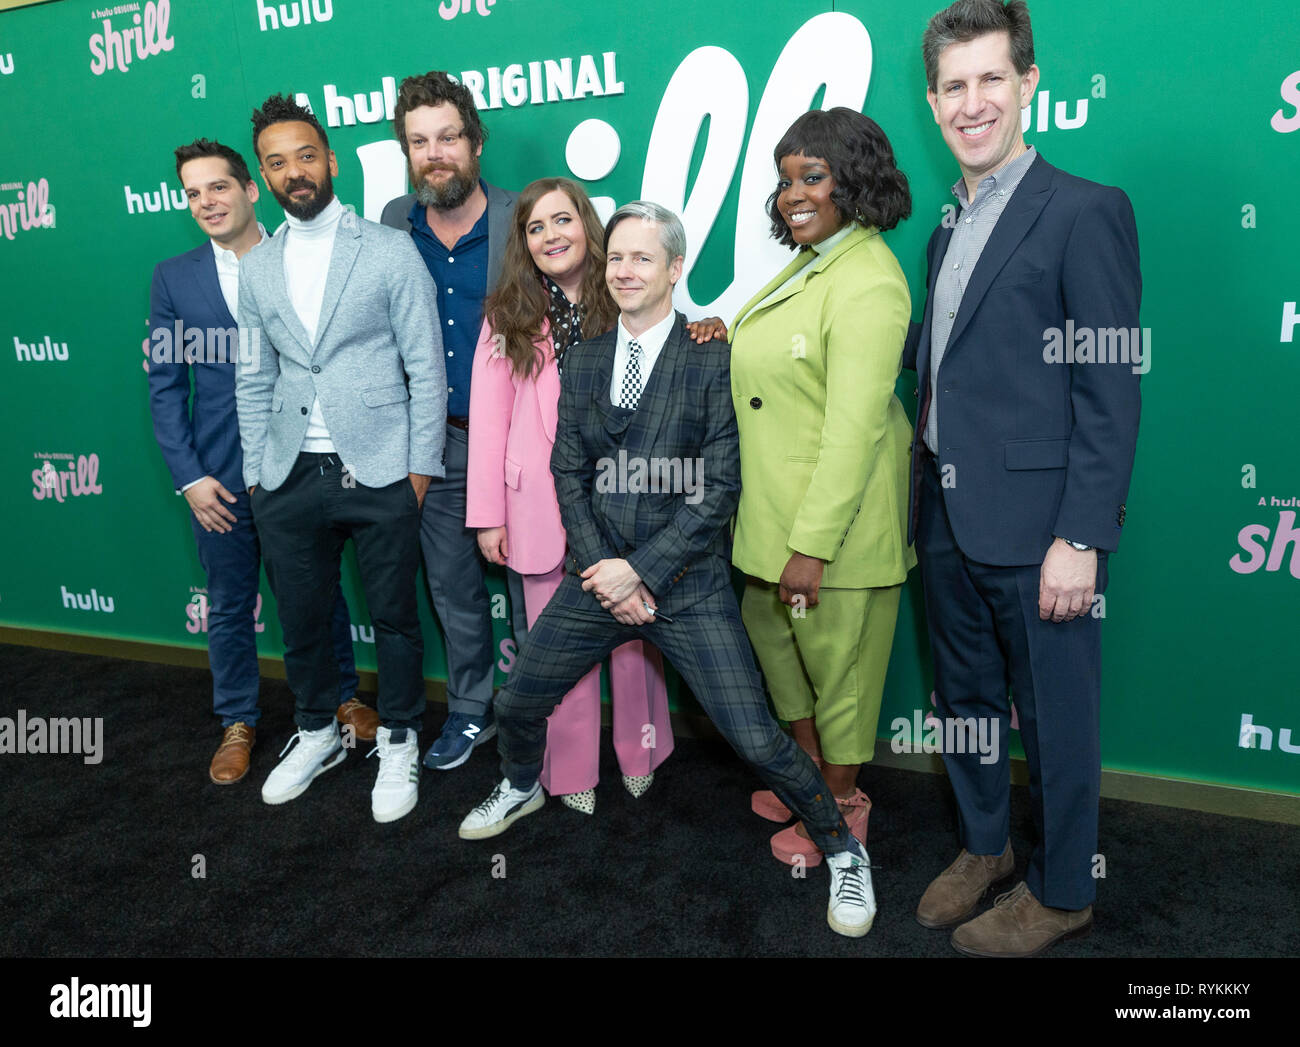 New York, United States. 13th Mar, 2019. Billy Rosenberg, Ian Owens, Luka Jones, Aidy Bryant, John Cameron Mitchell, Lolly Adefope, Craig Erwich attends New York Hulu Shrill premiere screening at Walter Reade Theater of Lincoln Center Credit: Lev Radin/Pacific Press/Alamy Live News Stock Photo